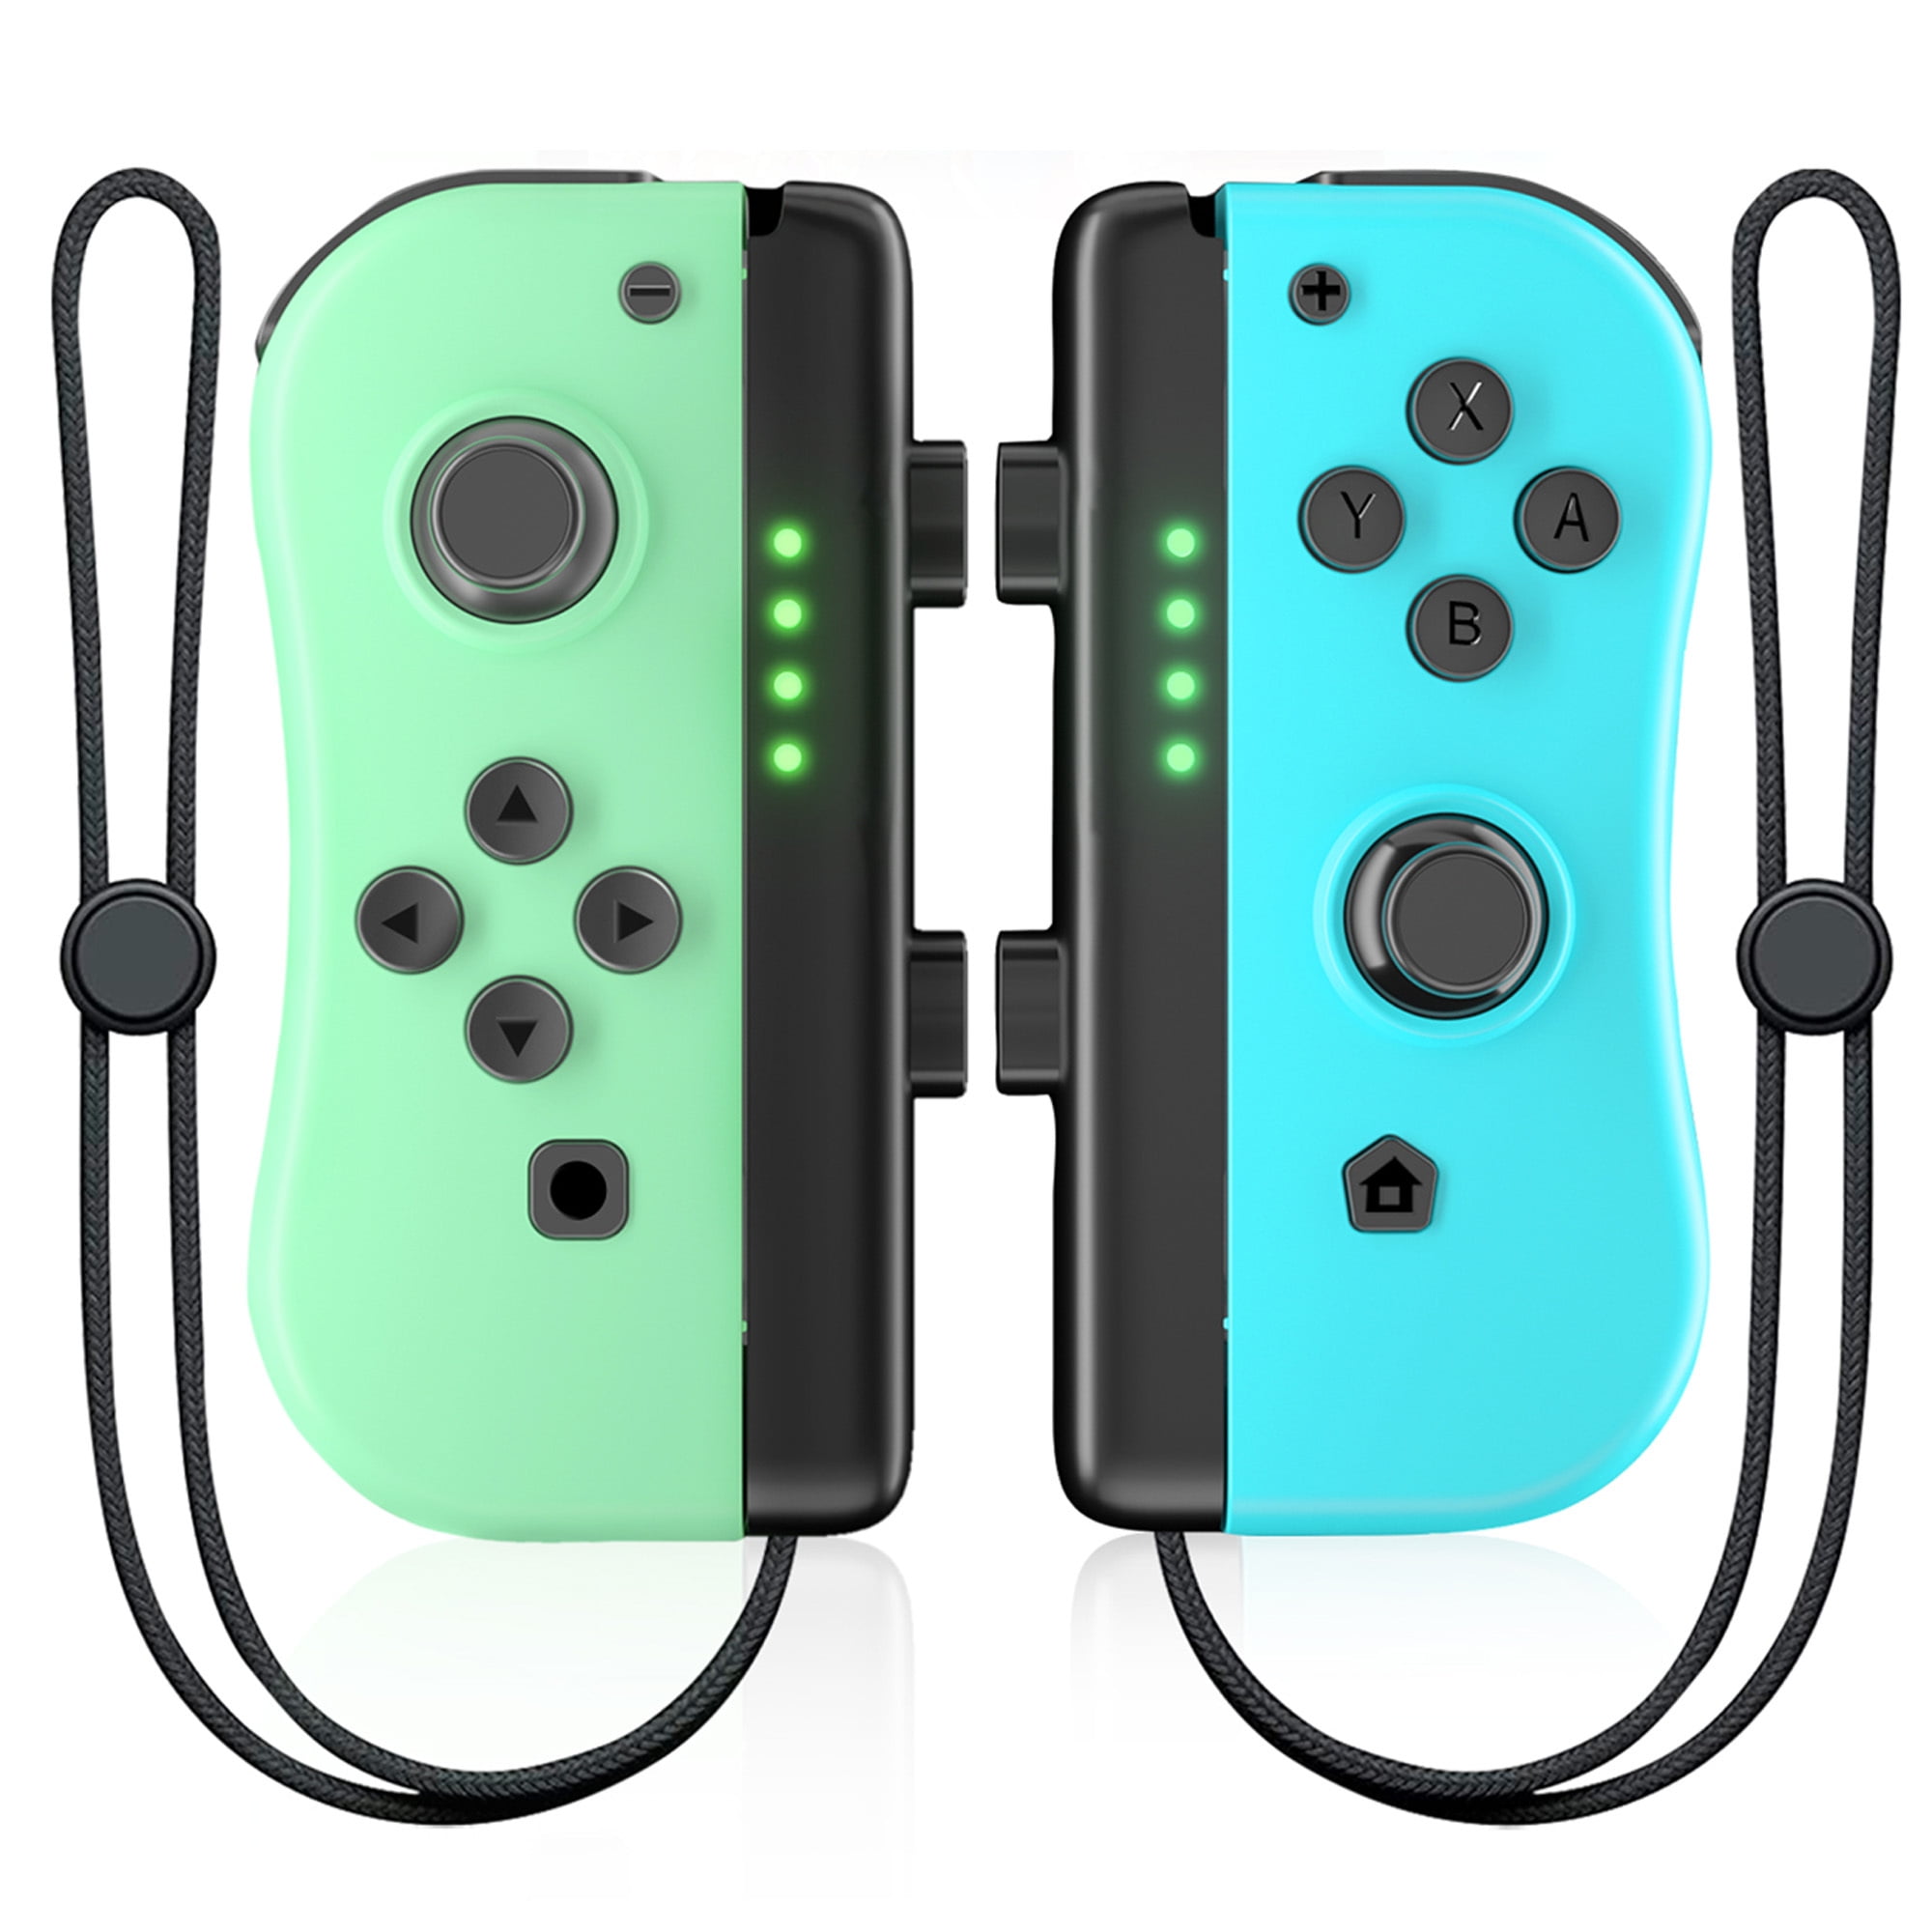 Bonadget Joypad for Nintendo Switch Controller, for Switch Joy Left and Right Controllers Support Dual Vibration/Motion Control/Wake-up Function, for Switch Joycon Pair (Avocado Green/Light Blue) - Walmart.com